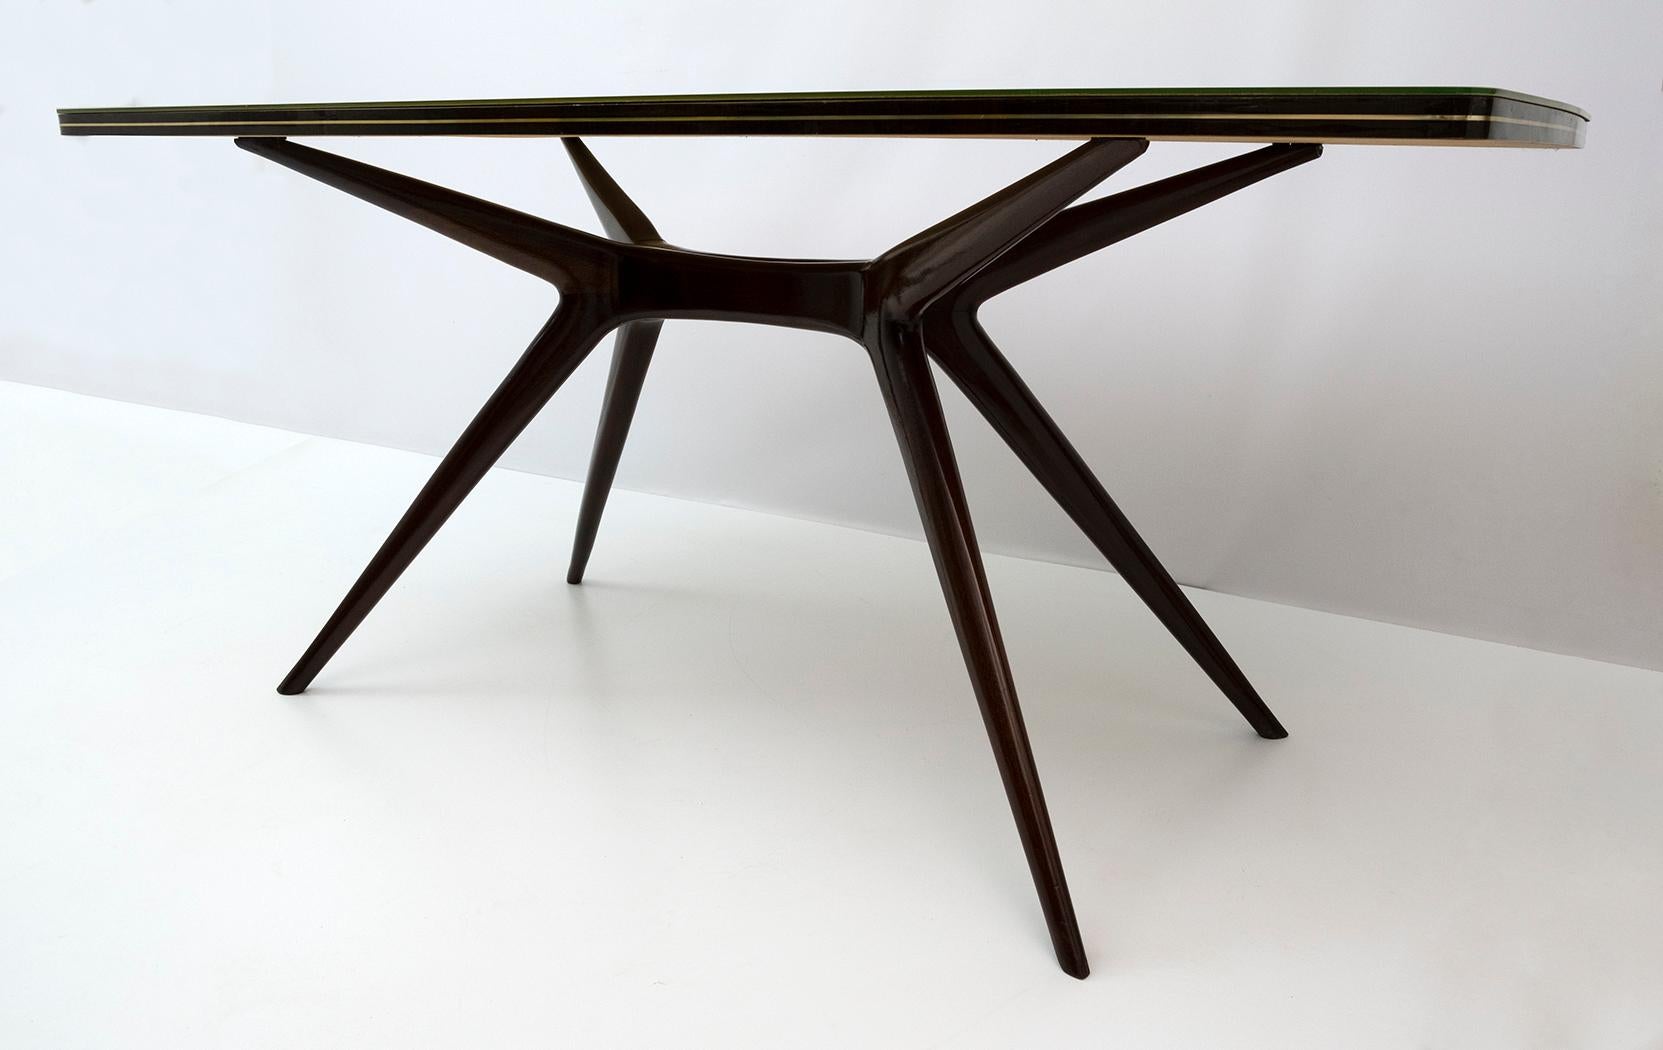 Glass Ico Parisi Mid-Century Modern Italian Dinning Table, 1950s For Sale